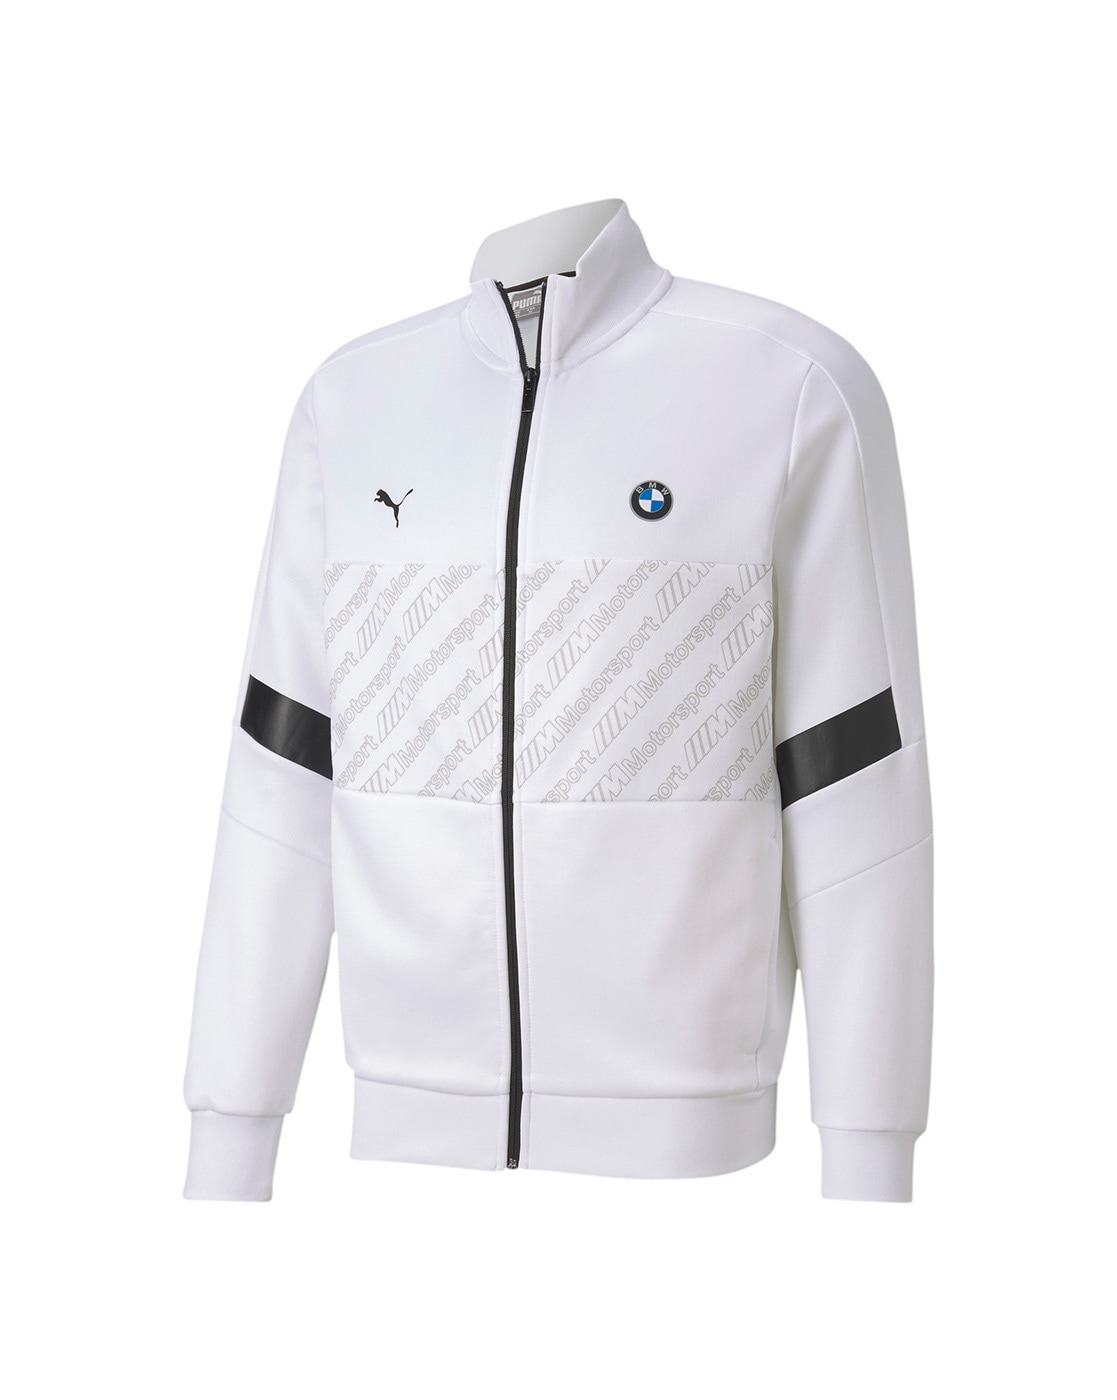 Race Car Jackets. BMW M Sport Racing Jacket Black and White